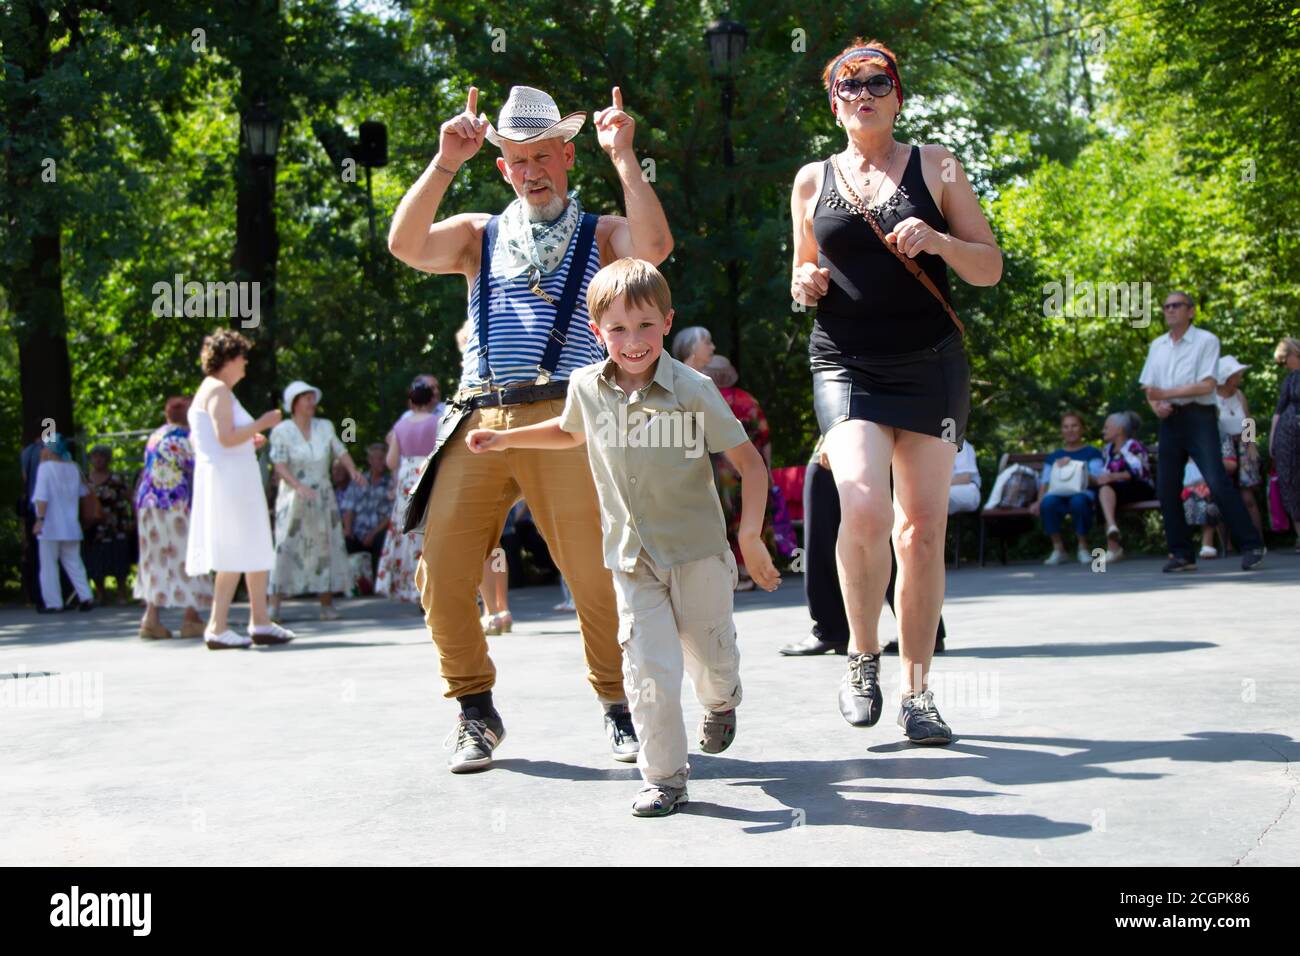 Cheerful grandparents are dancing with their grandson. Stock Photo